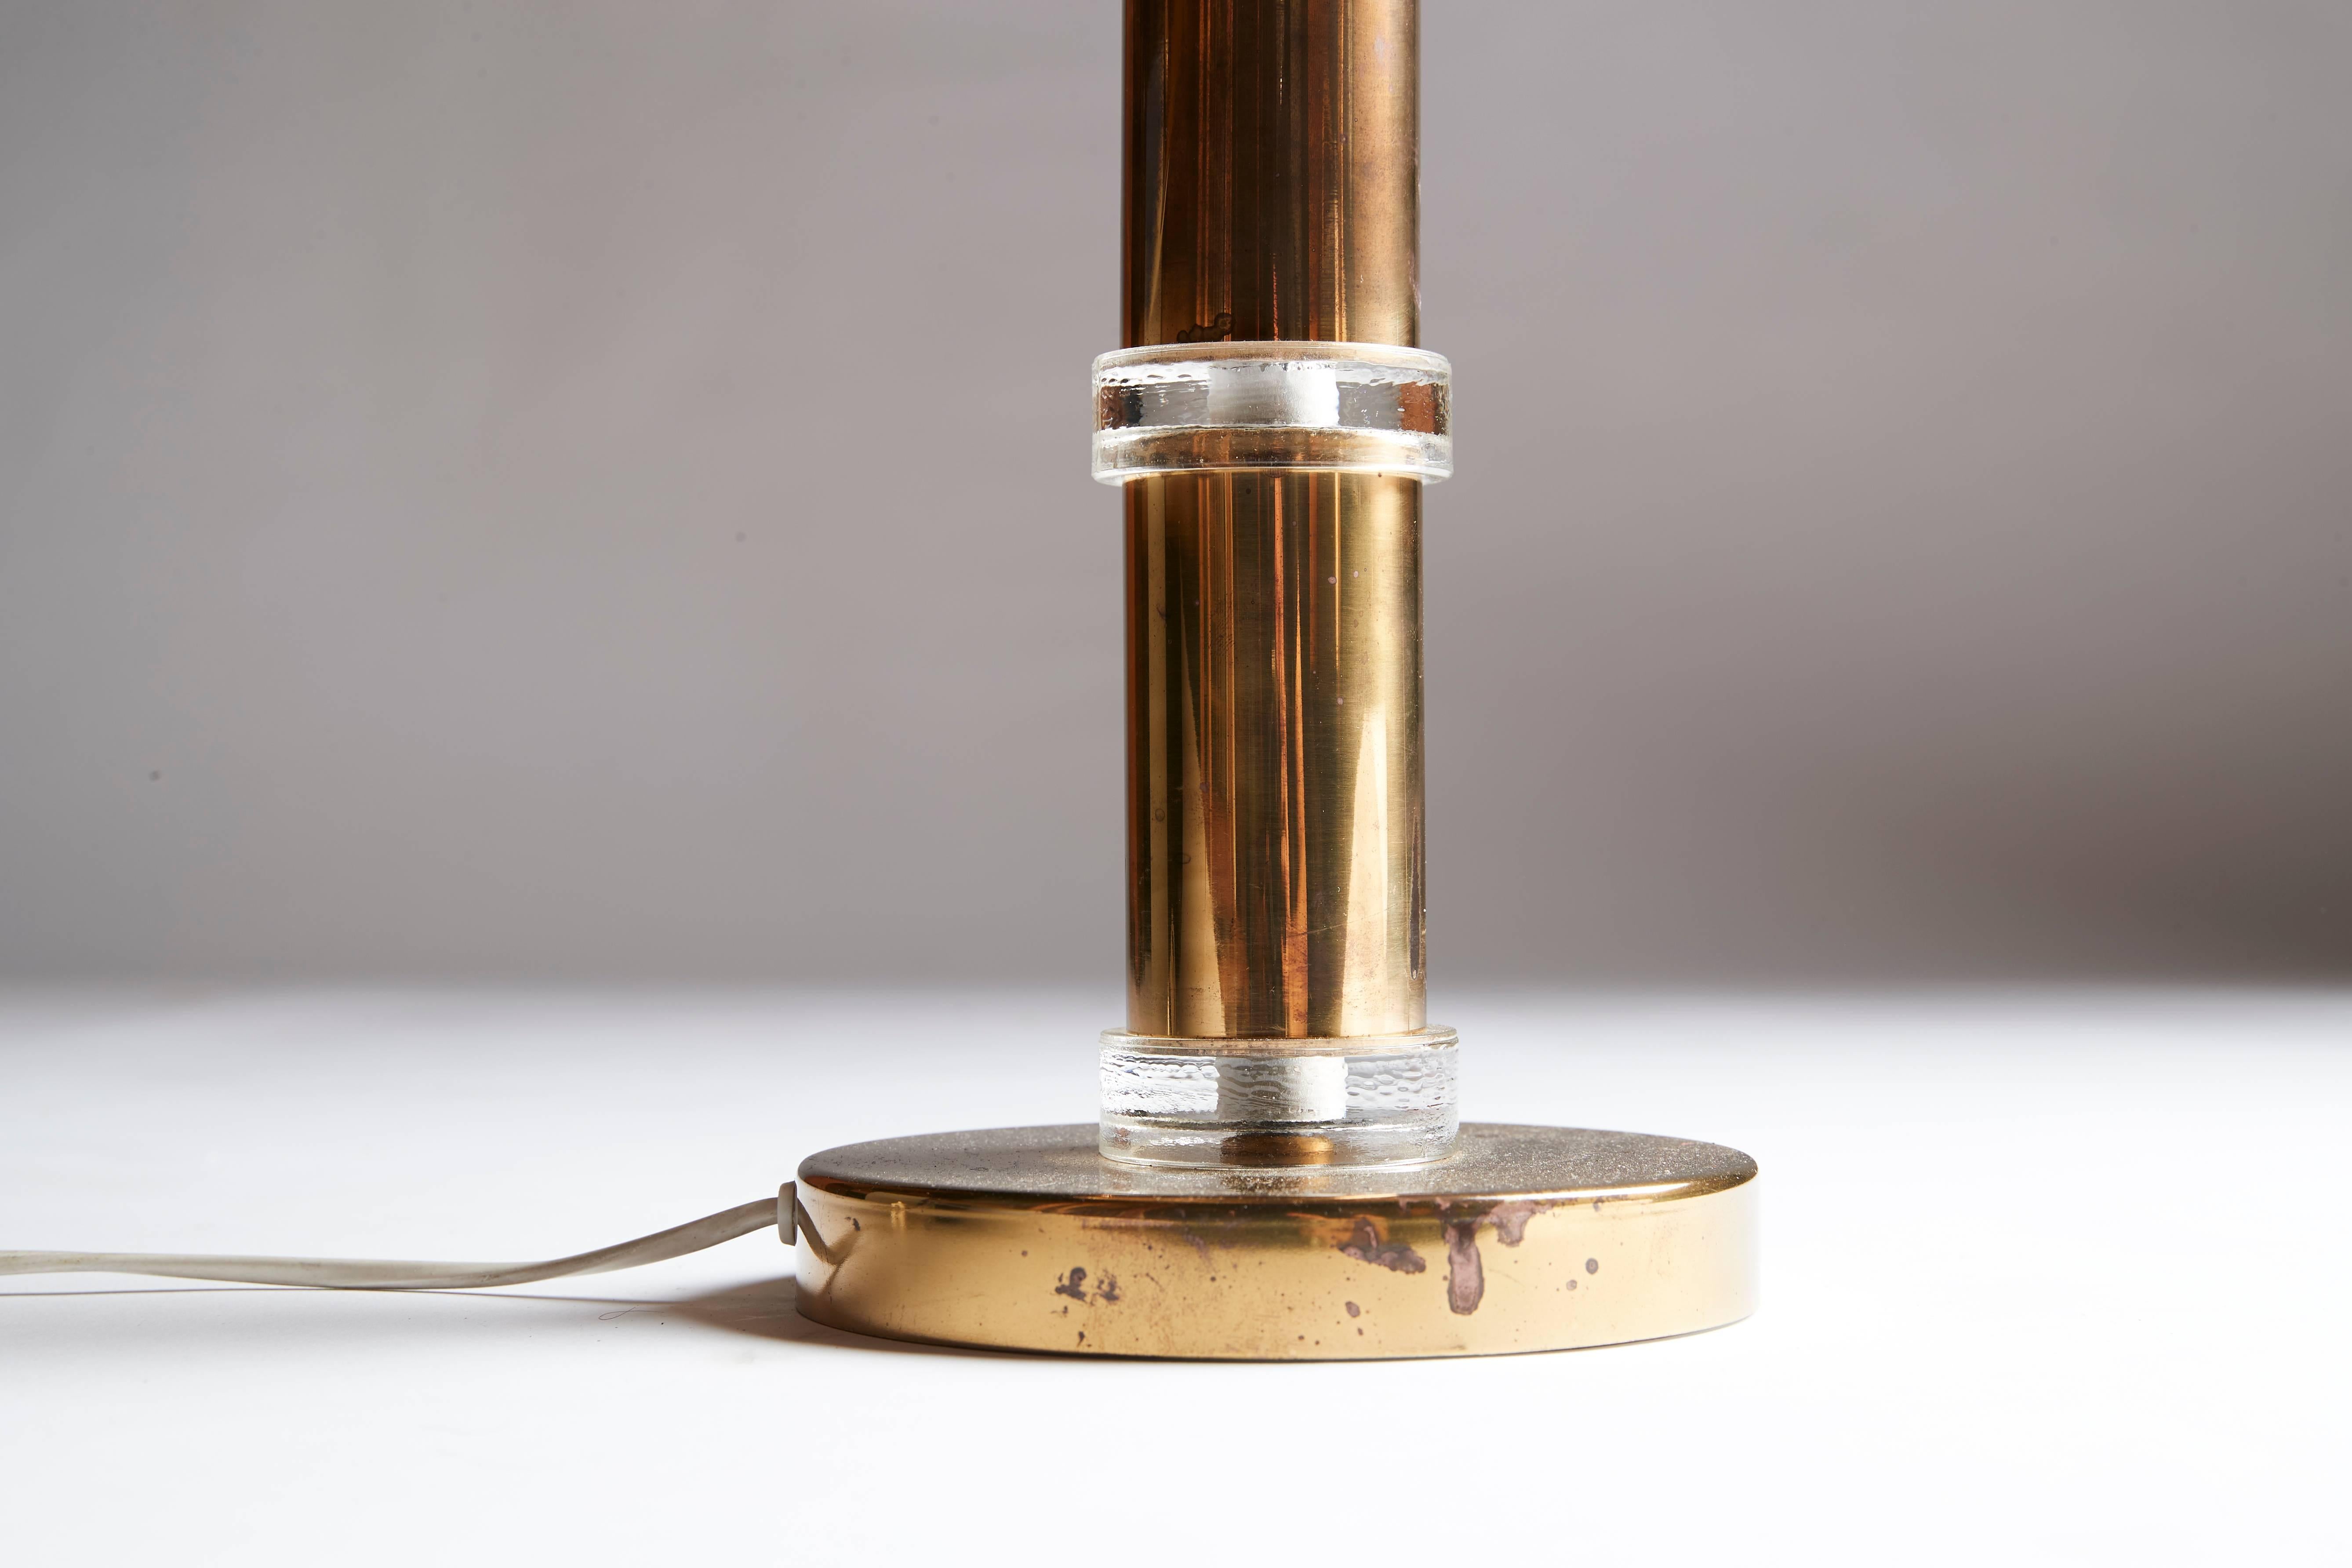 Brass and glass table lamp. New shade.
Swedish work dating from the 1960s.